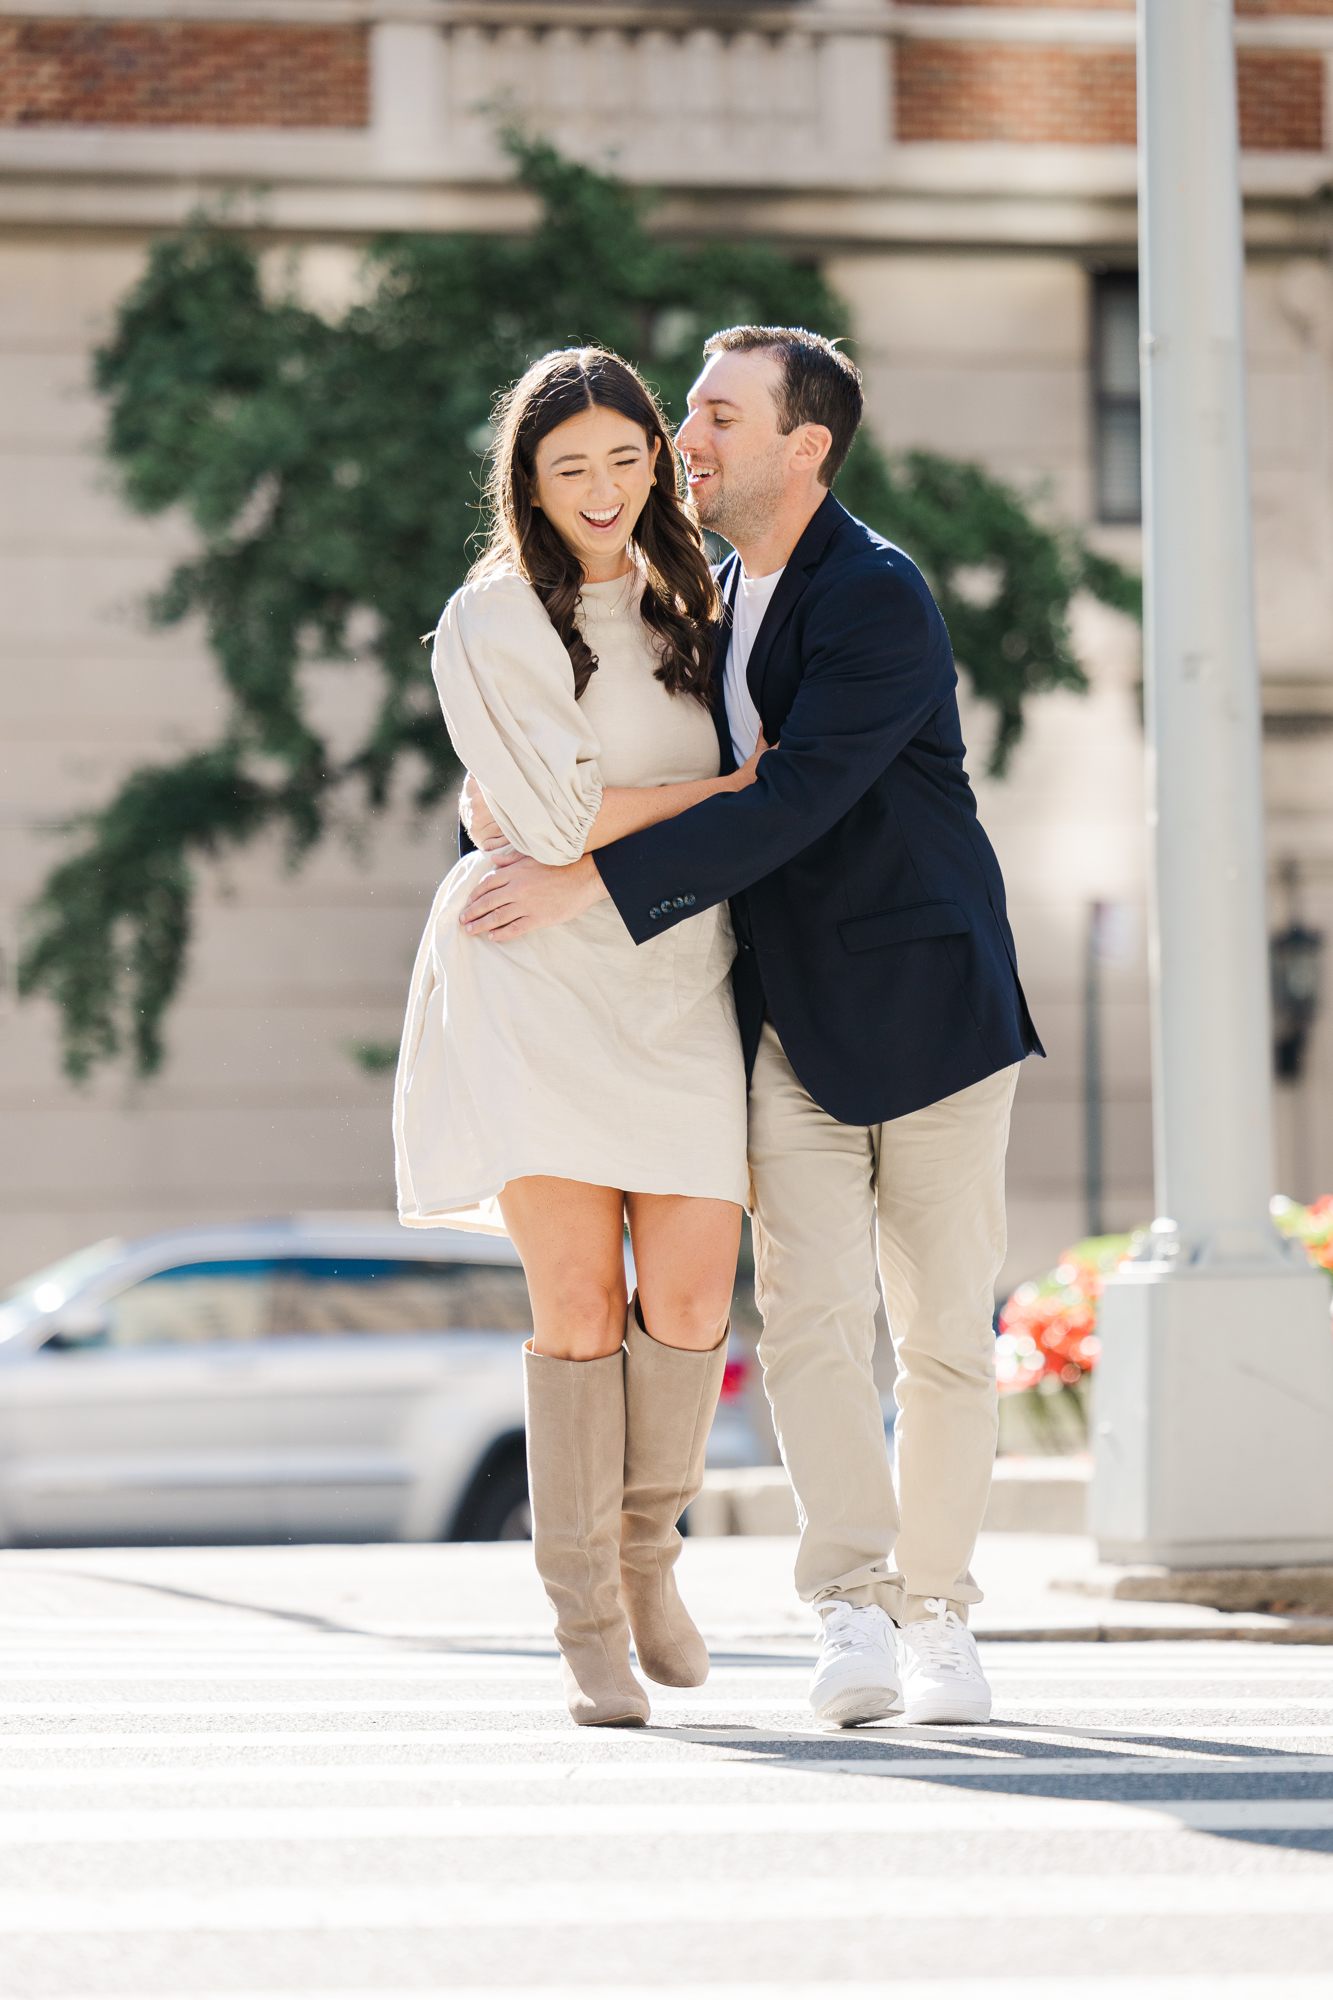 Amazing Engagement Photos In Upper East Side